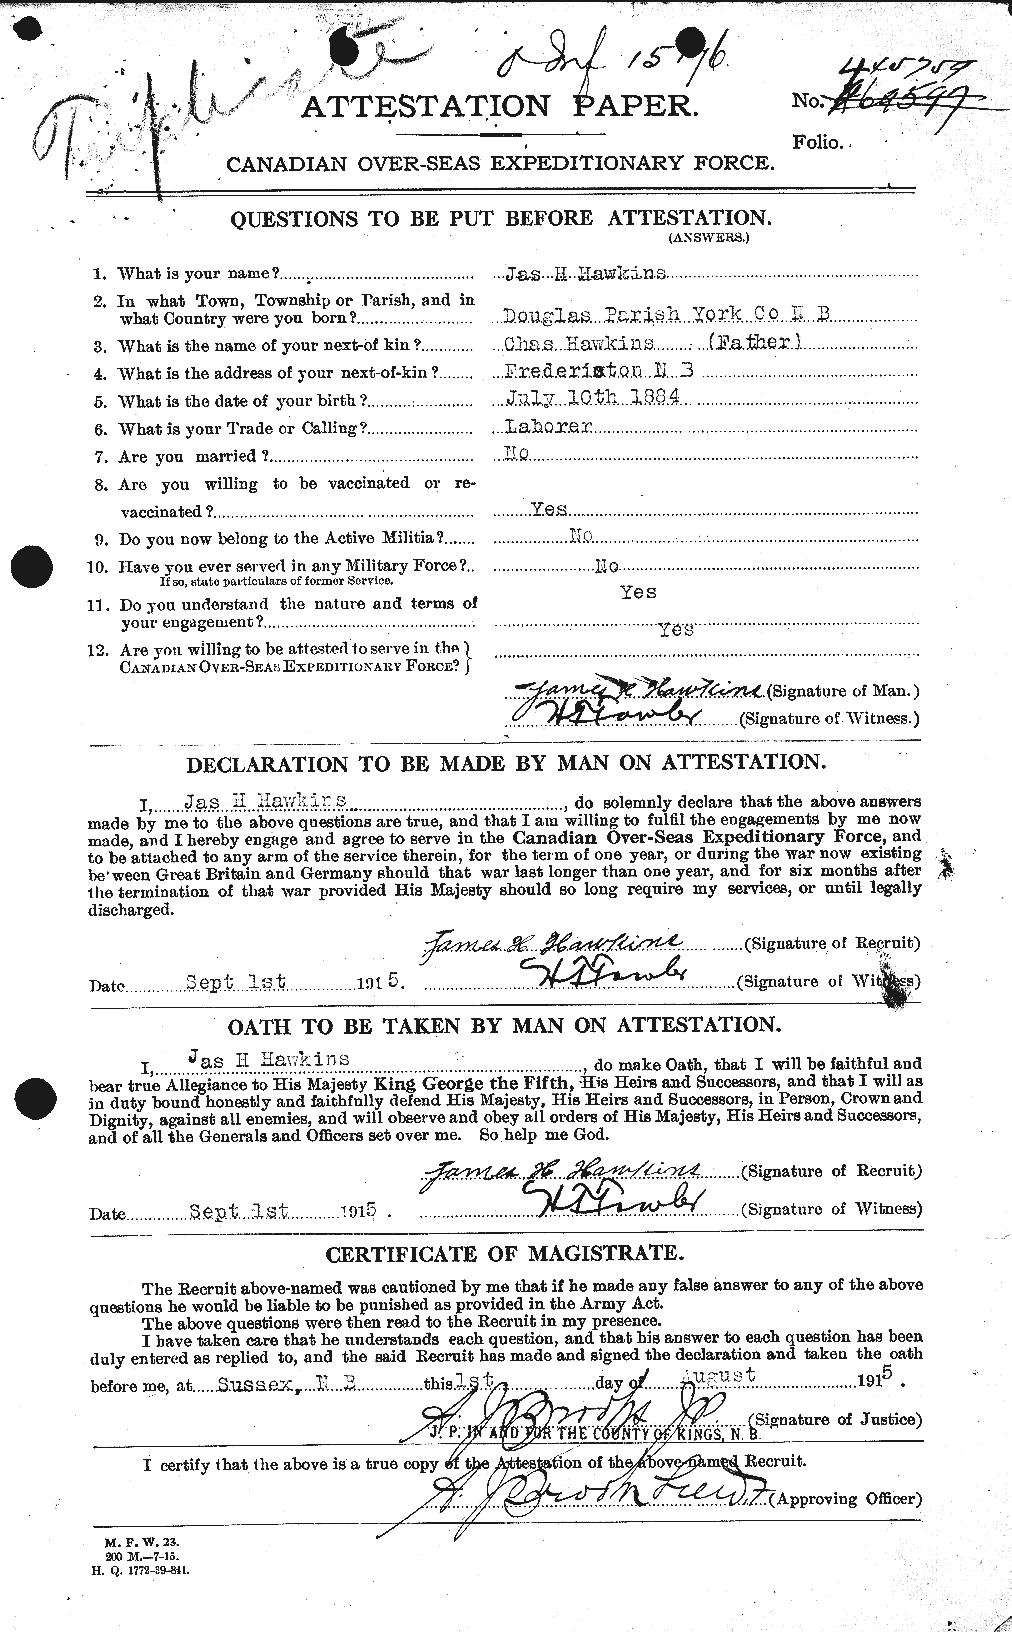 Personnel Records of the First World War - CEF 387175a